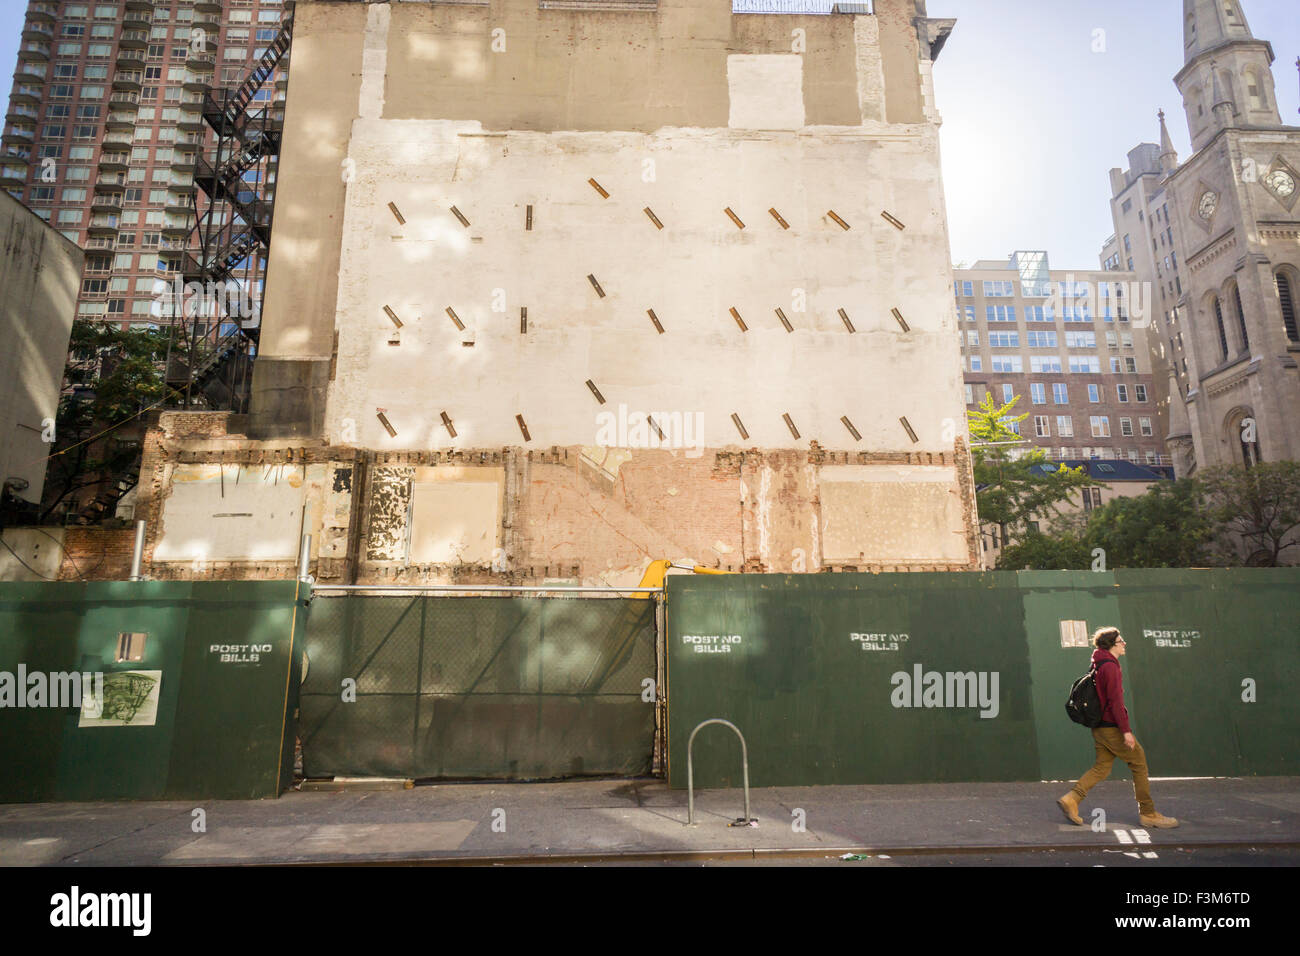 Remains of floors and rooms on a reinforced exposed wall of a building adjacent to a construction site in New York on Tuesday, October 6, 2015. (© Richard B. Levine) Stock Photo